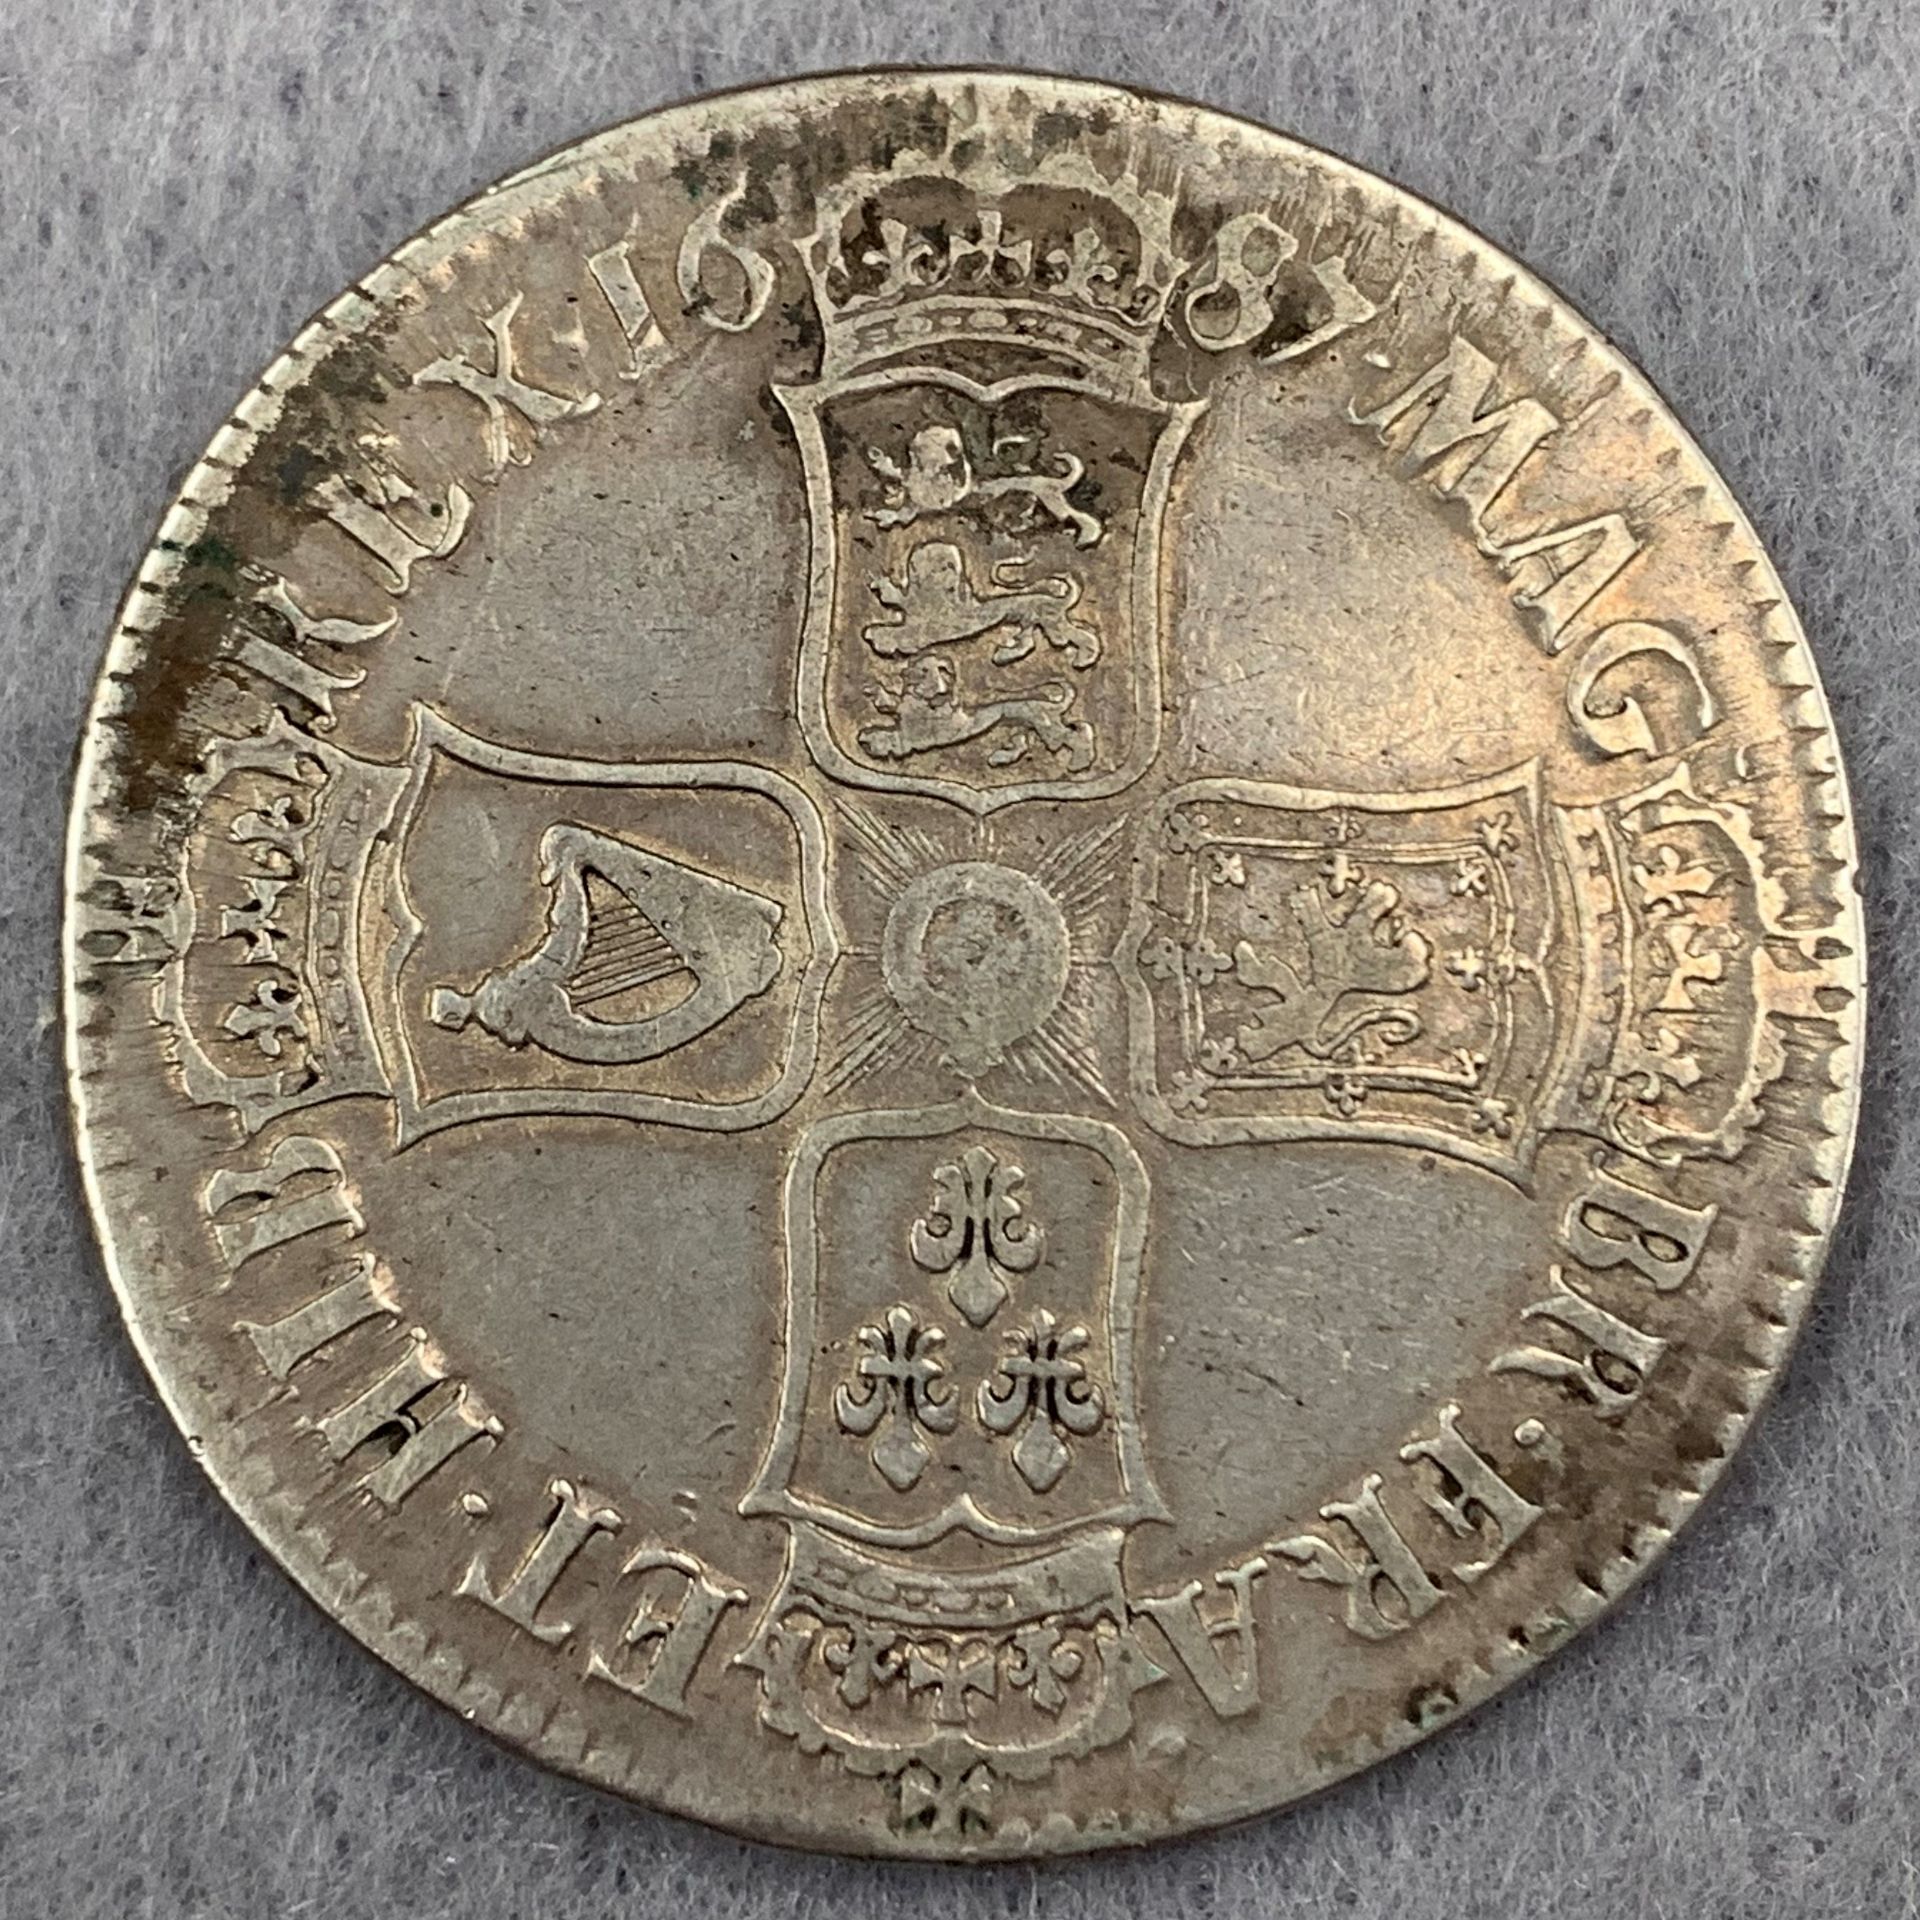 A 1687 James II silver crown - rare in good grade - Image 2 of 2